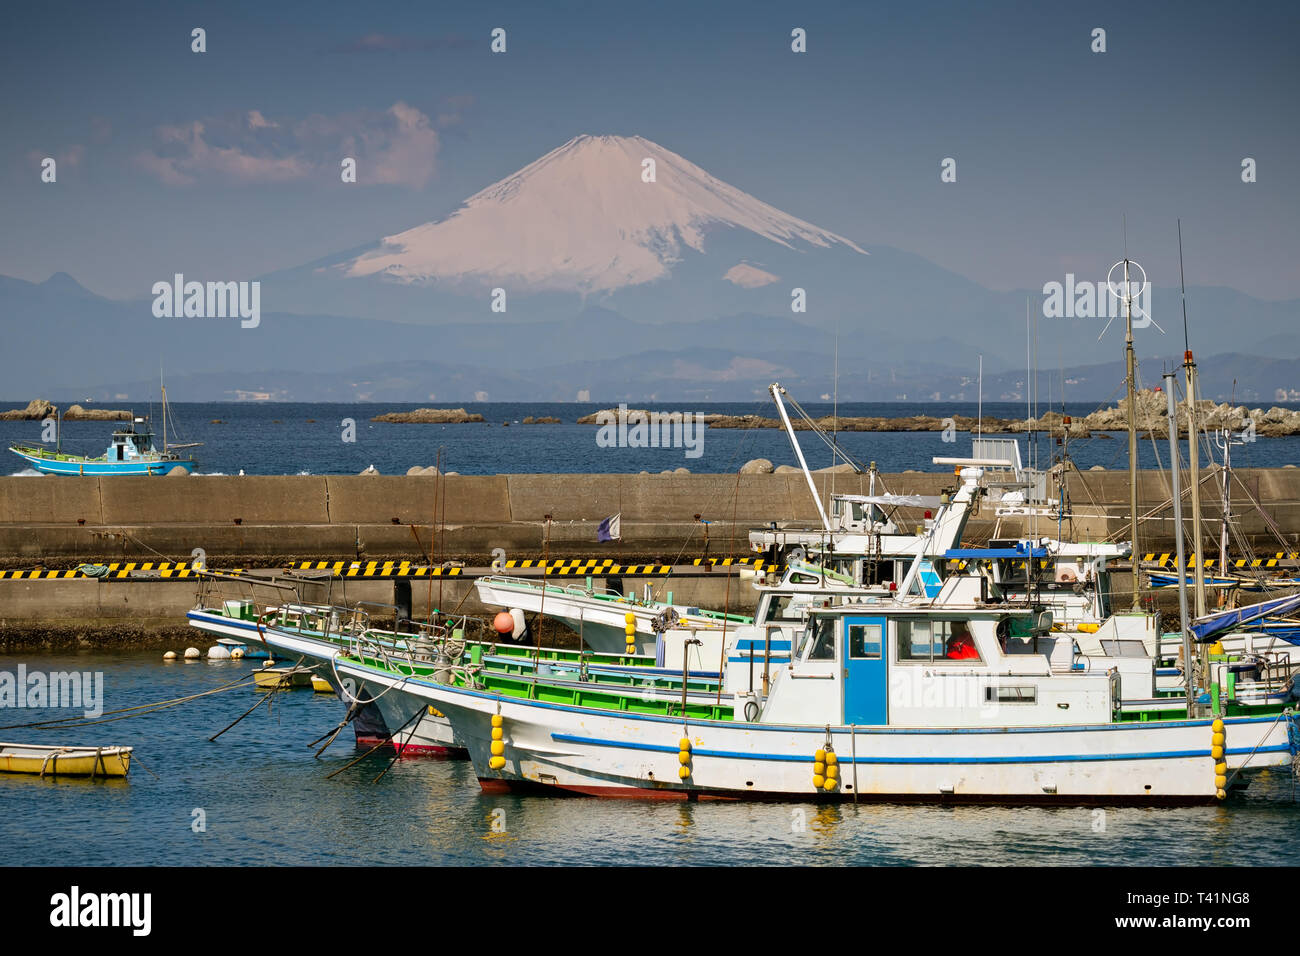 Fishing boats in a small port in Hayama, Japan with Mount Fuji in the background. Stock Photo